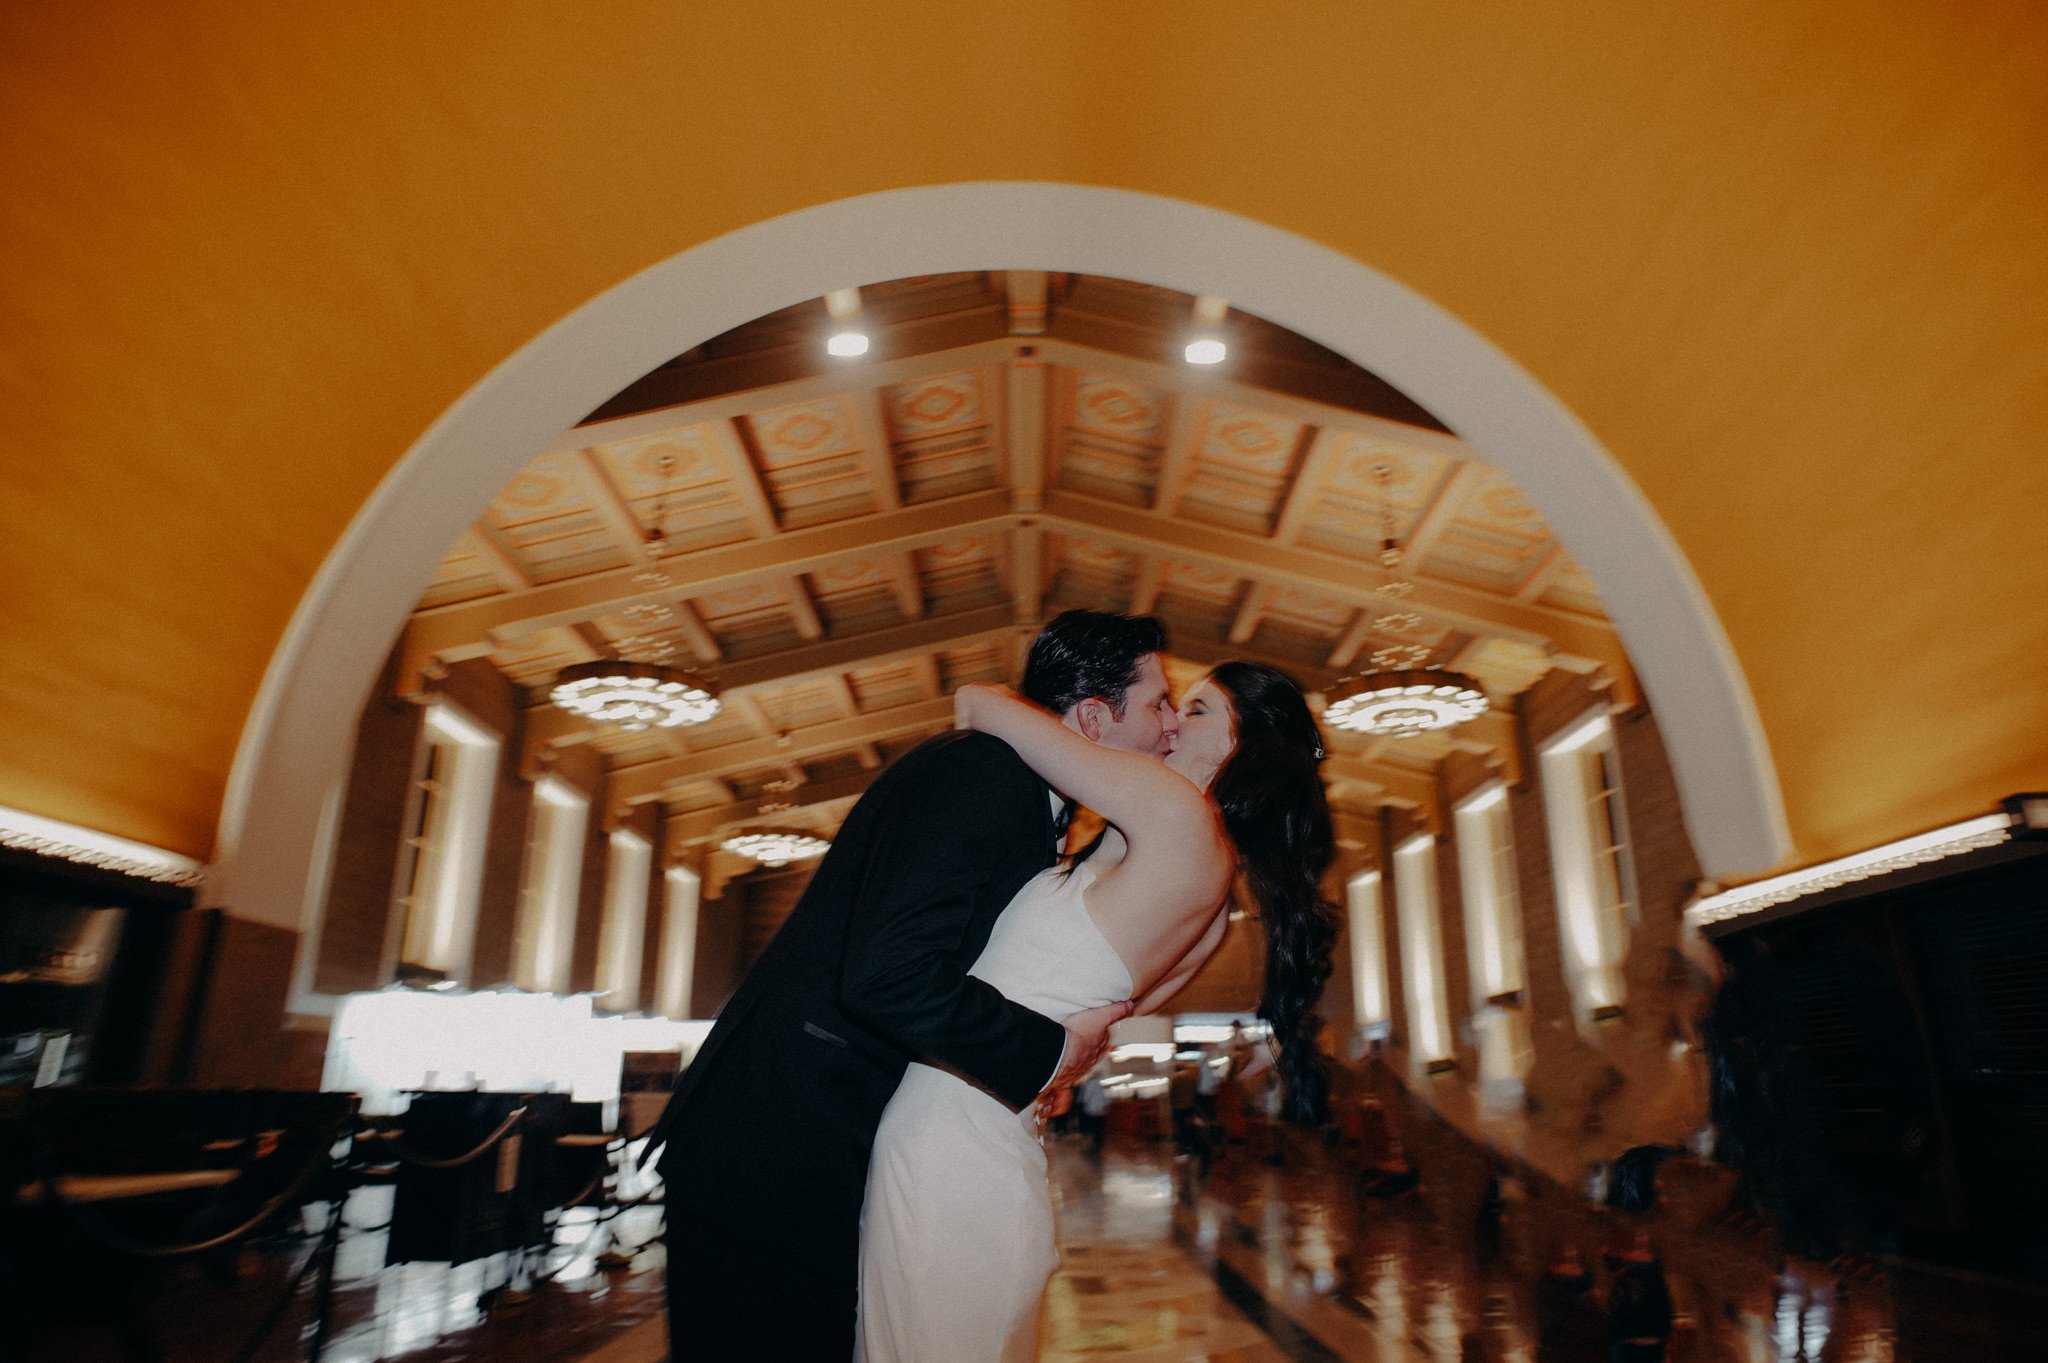 union station home bound brewery wedding - wedding photographers in los angeles - itlaphoto.com-114.jpg